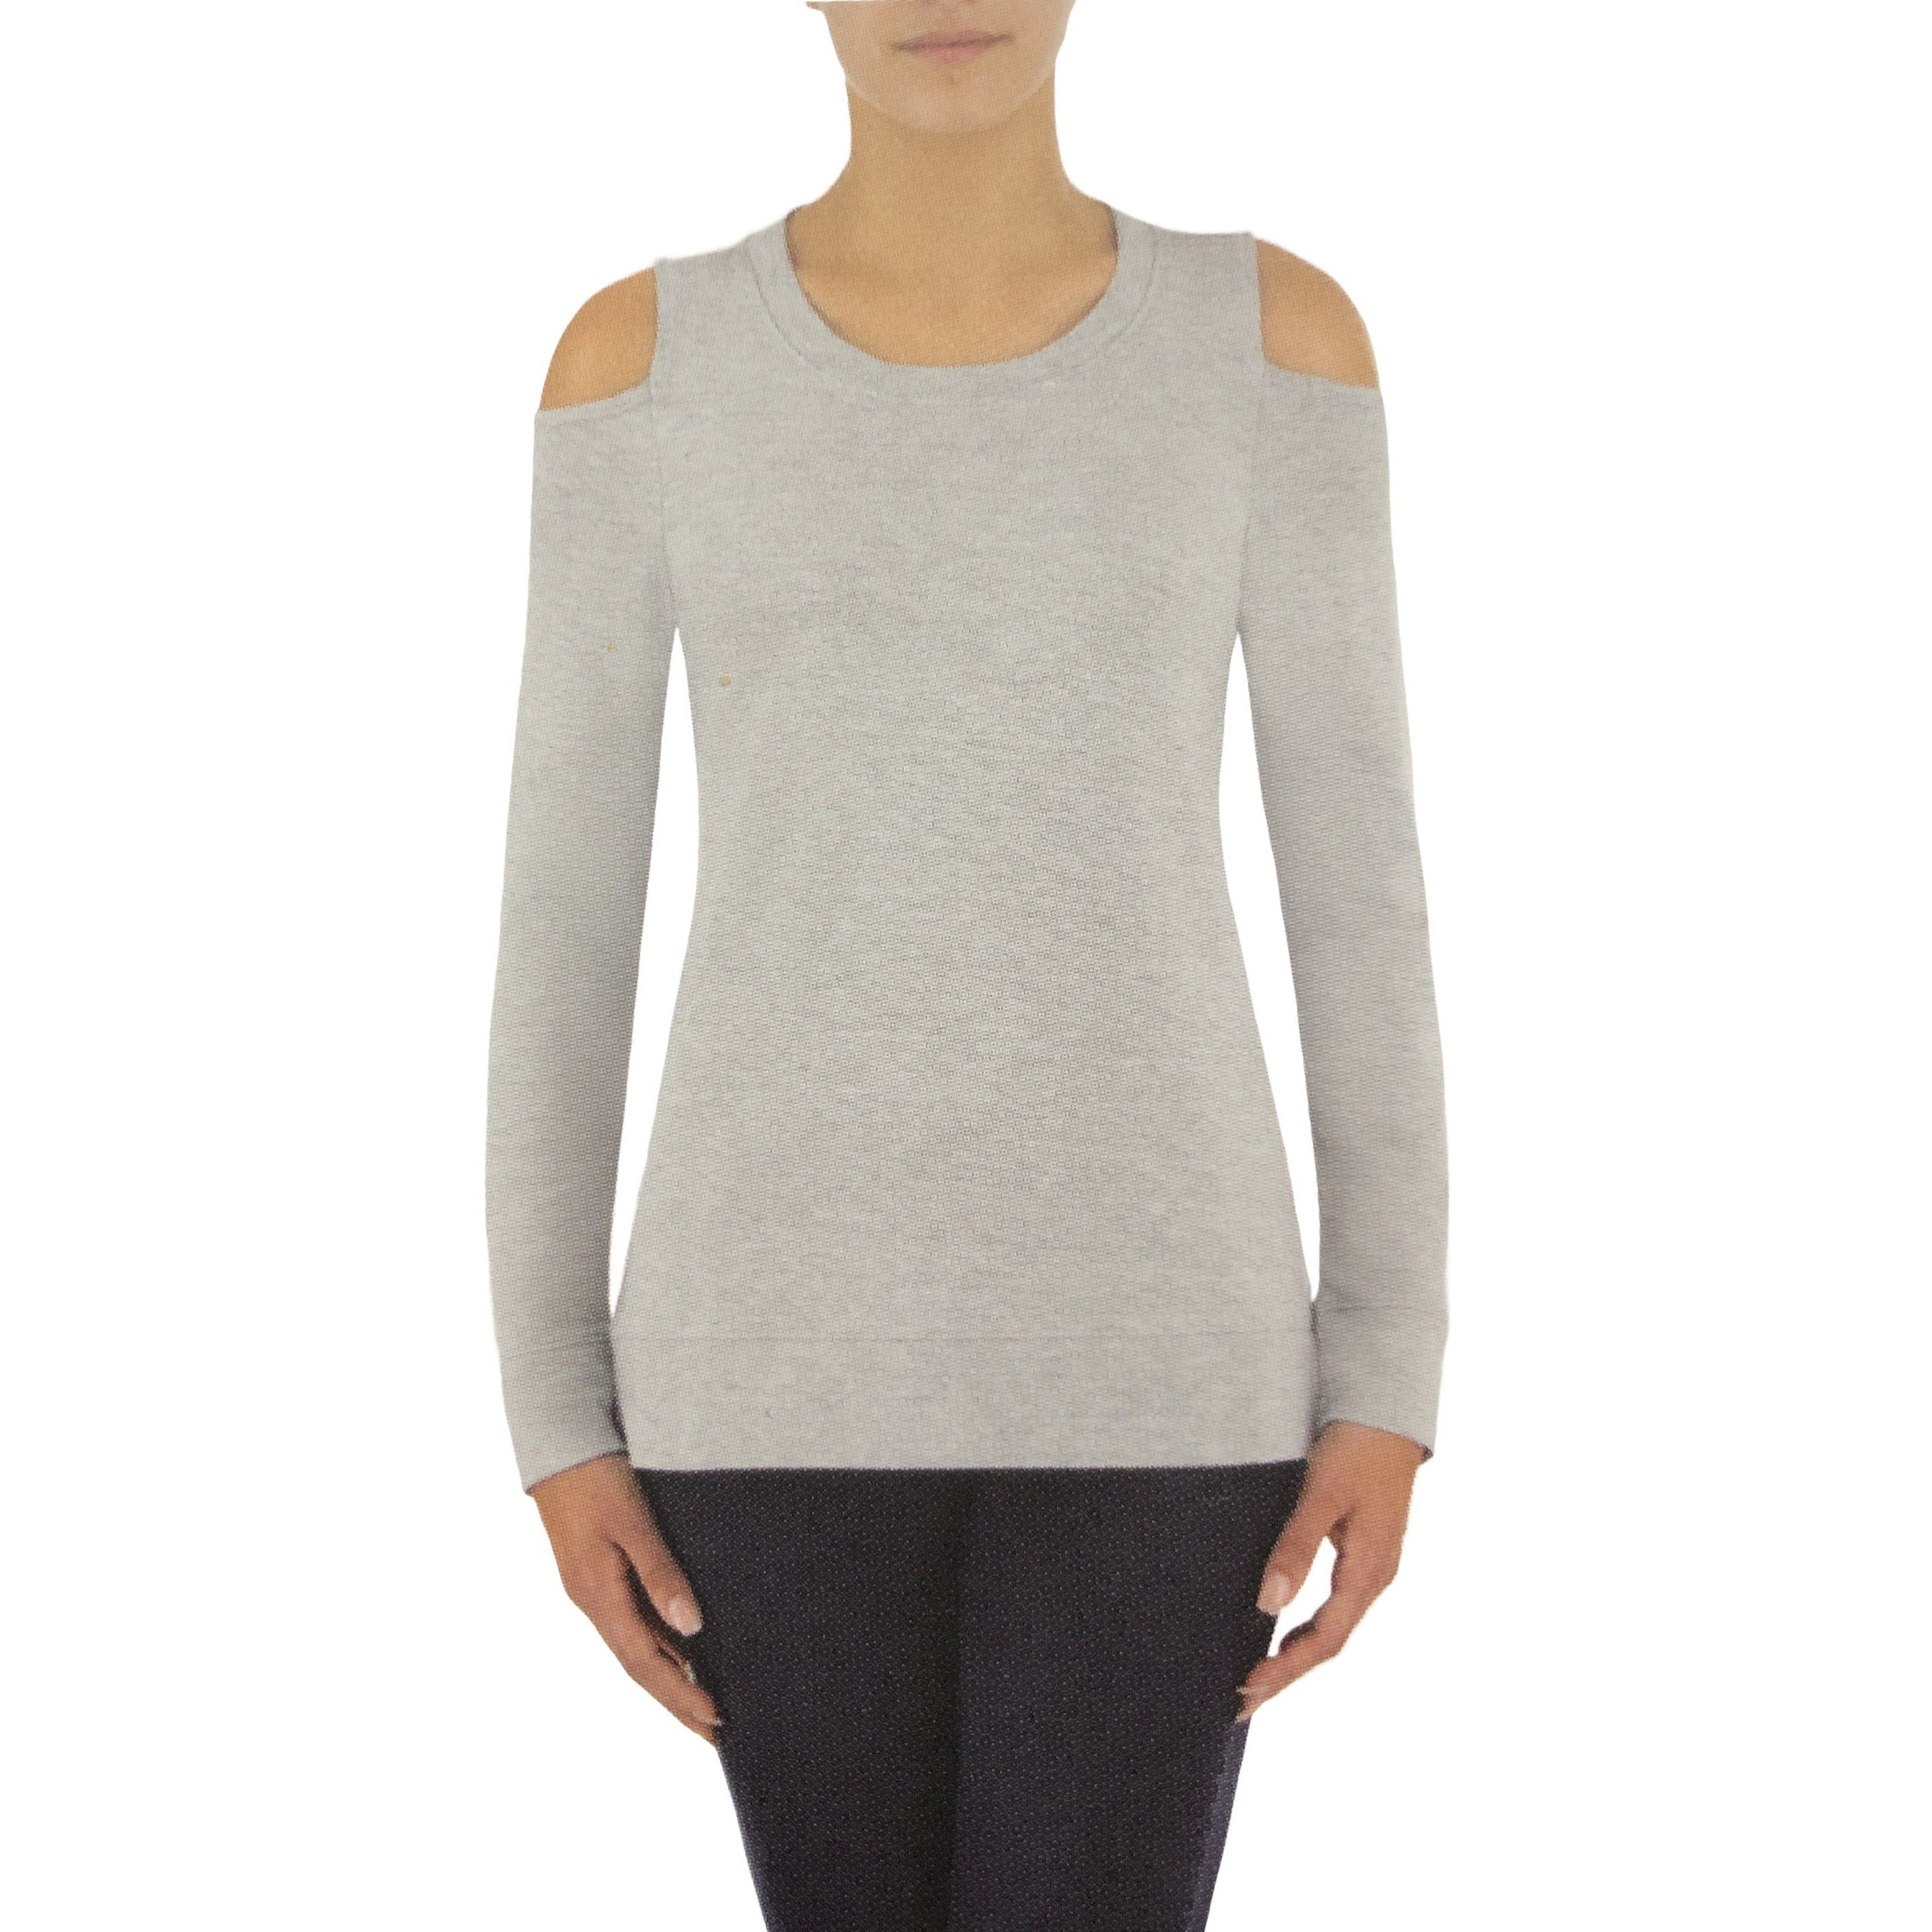 Dahlia womens pullover top with shoulder cutouts in beige for casual or dressup